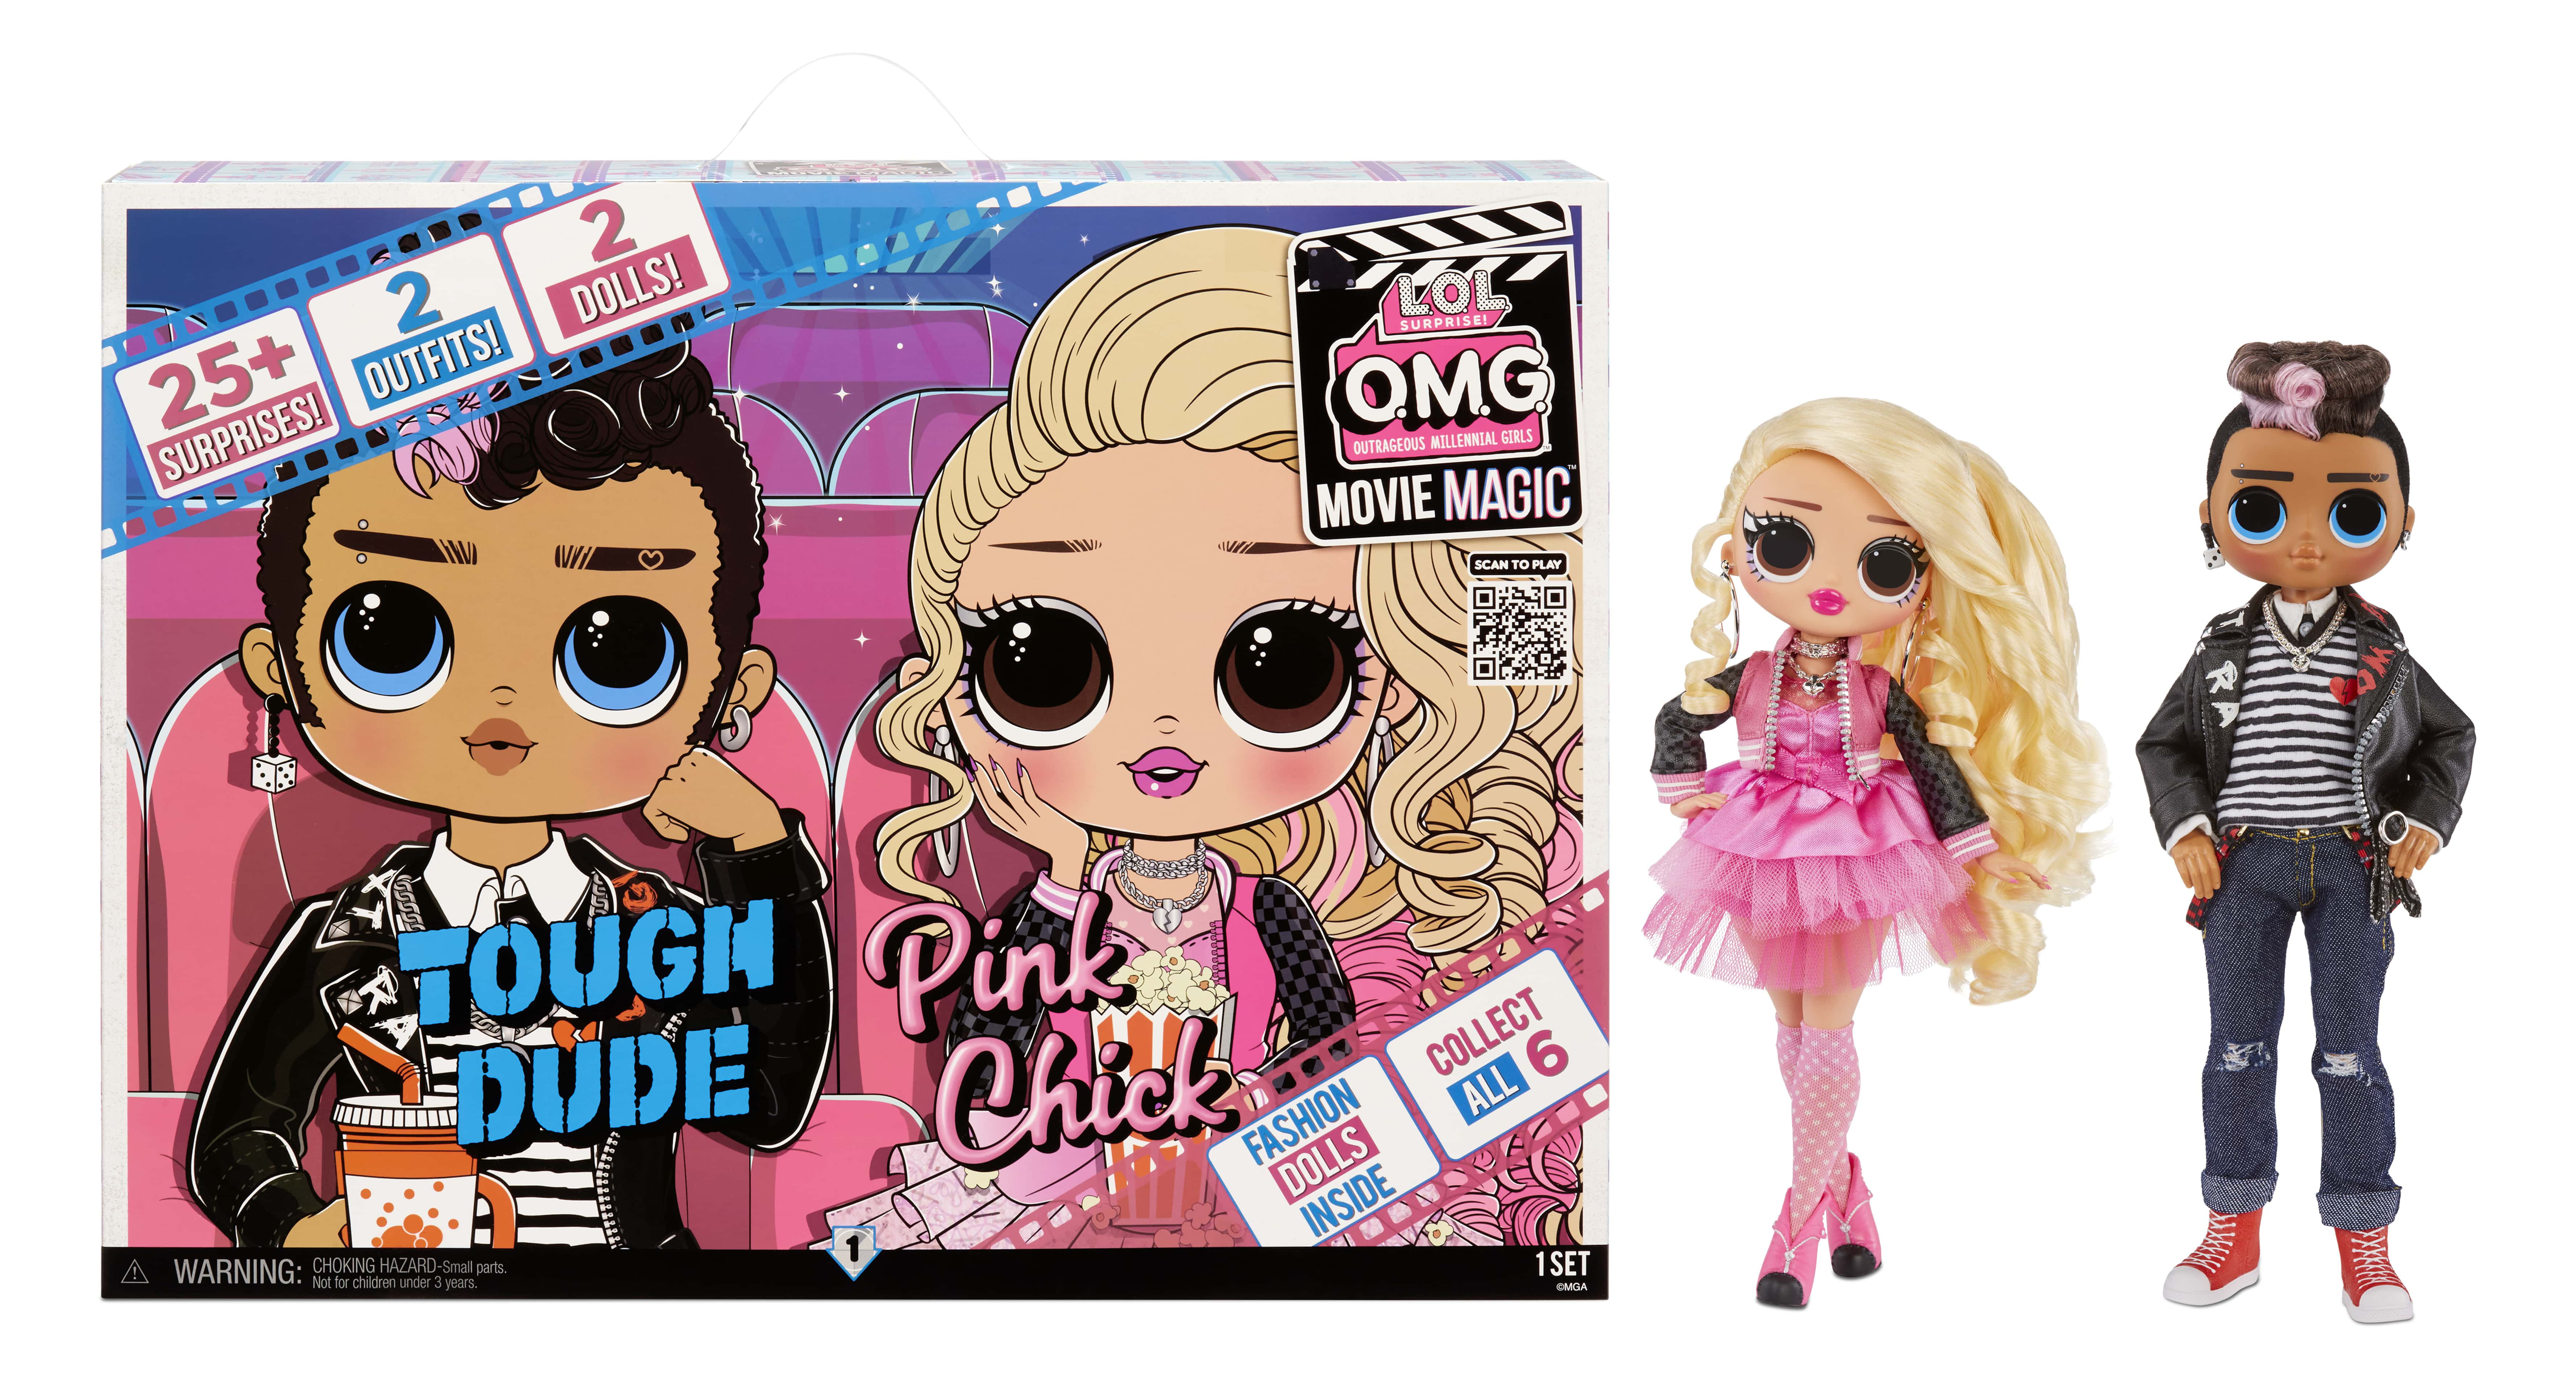 LOL Surprise Omg Movie Magic Fashion Dolls 2-Pack Tough Dude and Pink Chick  With 25 Surprises